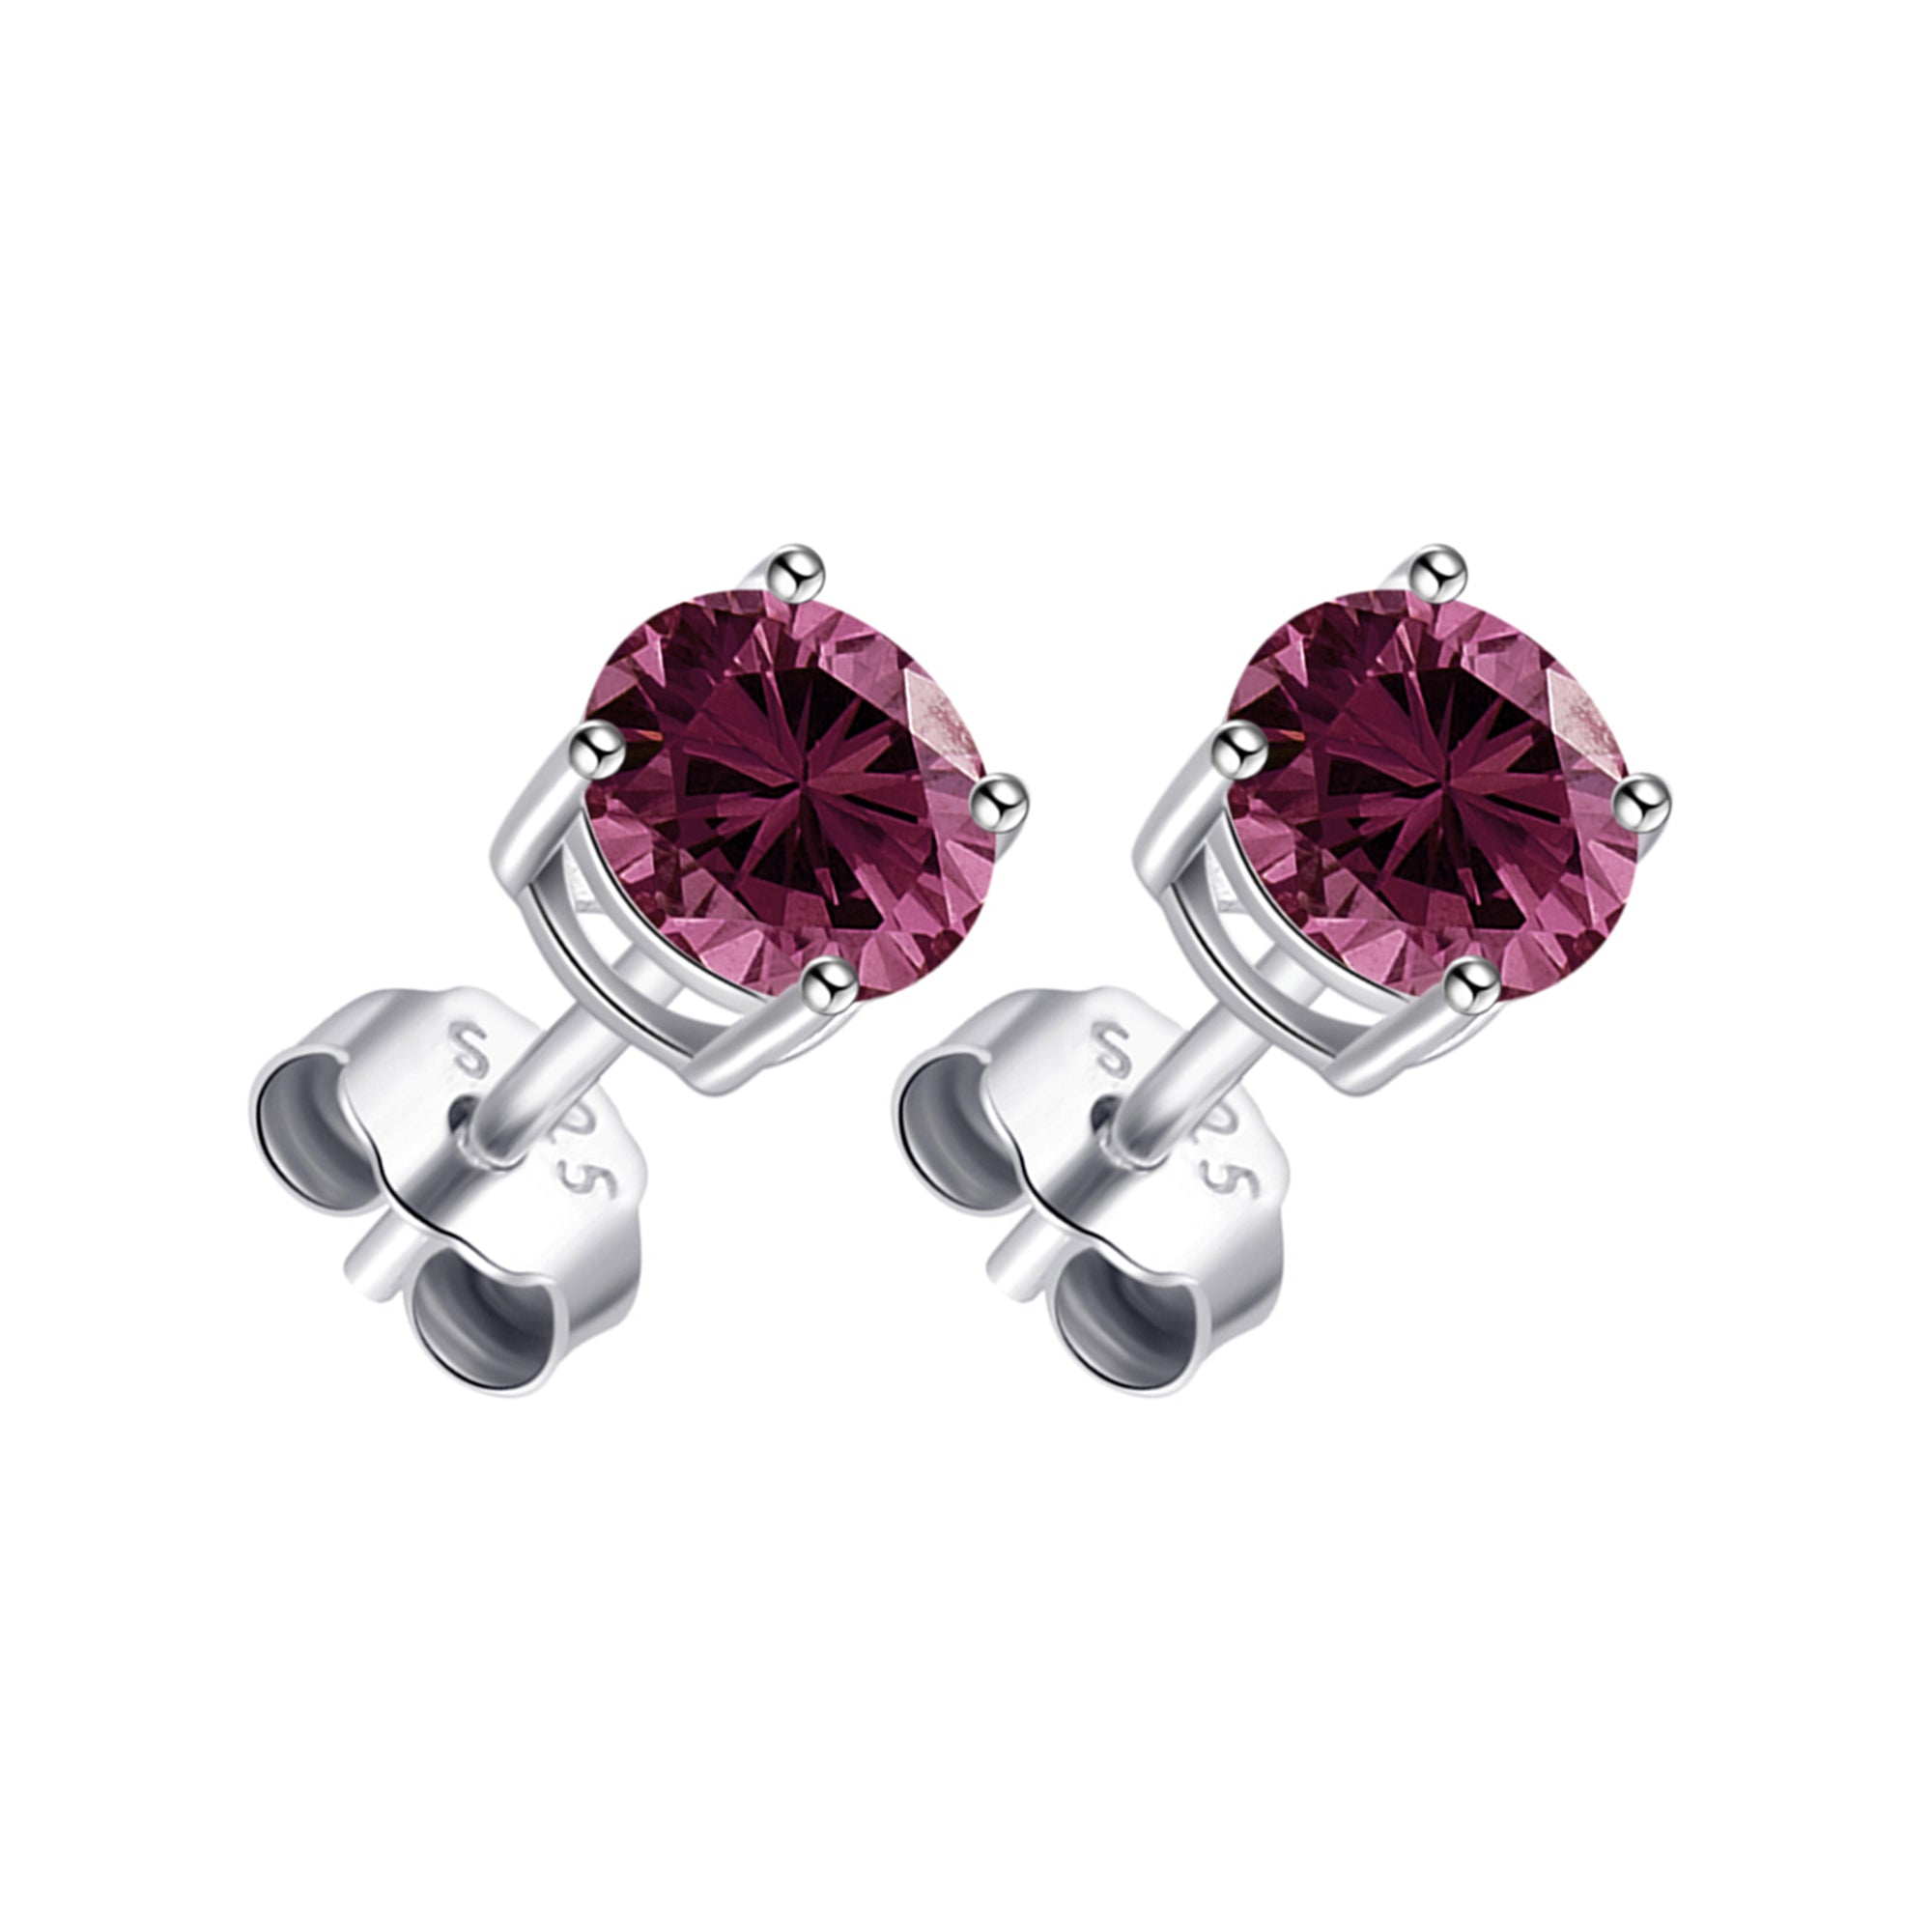 Sterling Silver Purple Earrings Created with Zircondia® Crystals by Philip Jones Jewellery